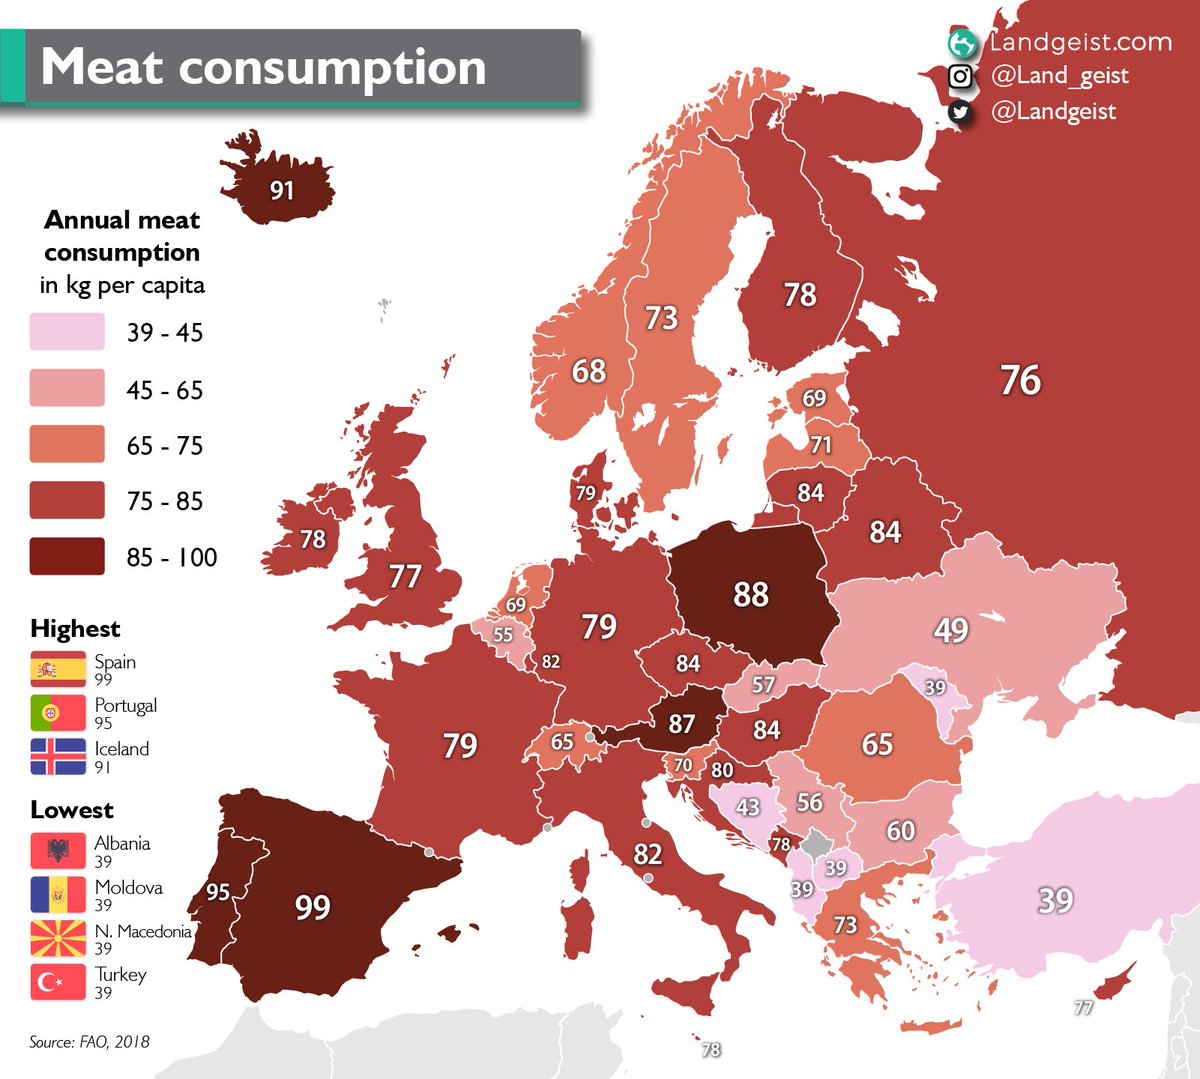 Lowest meat consumption in Europe (in kg per capita).

The biggest consumers of meat are 🇪🇸 Spain (99%), 🇵🇹 Portugal (95), 🇮🇸 Iceland (91), 🇵🇱 Poland (88), and 🇦🇹 Austria (87).